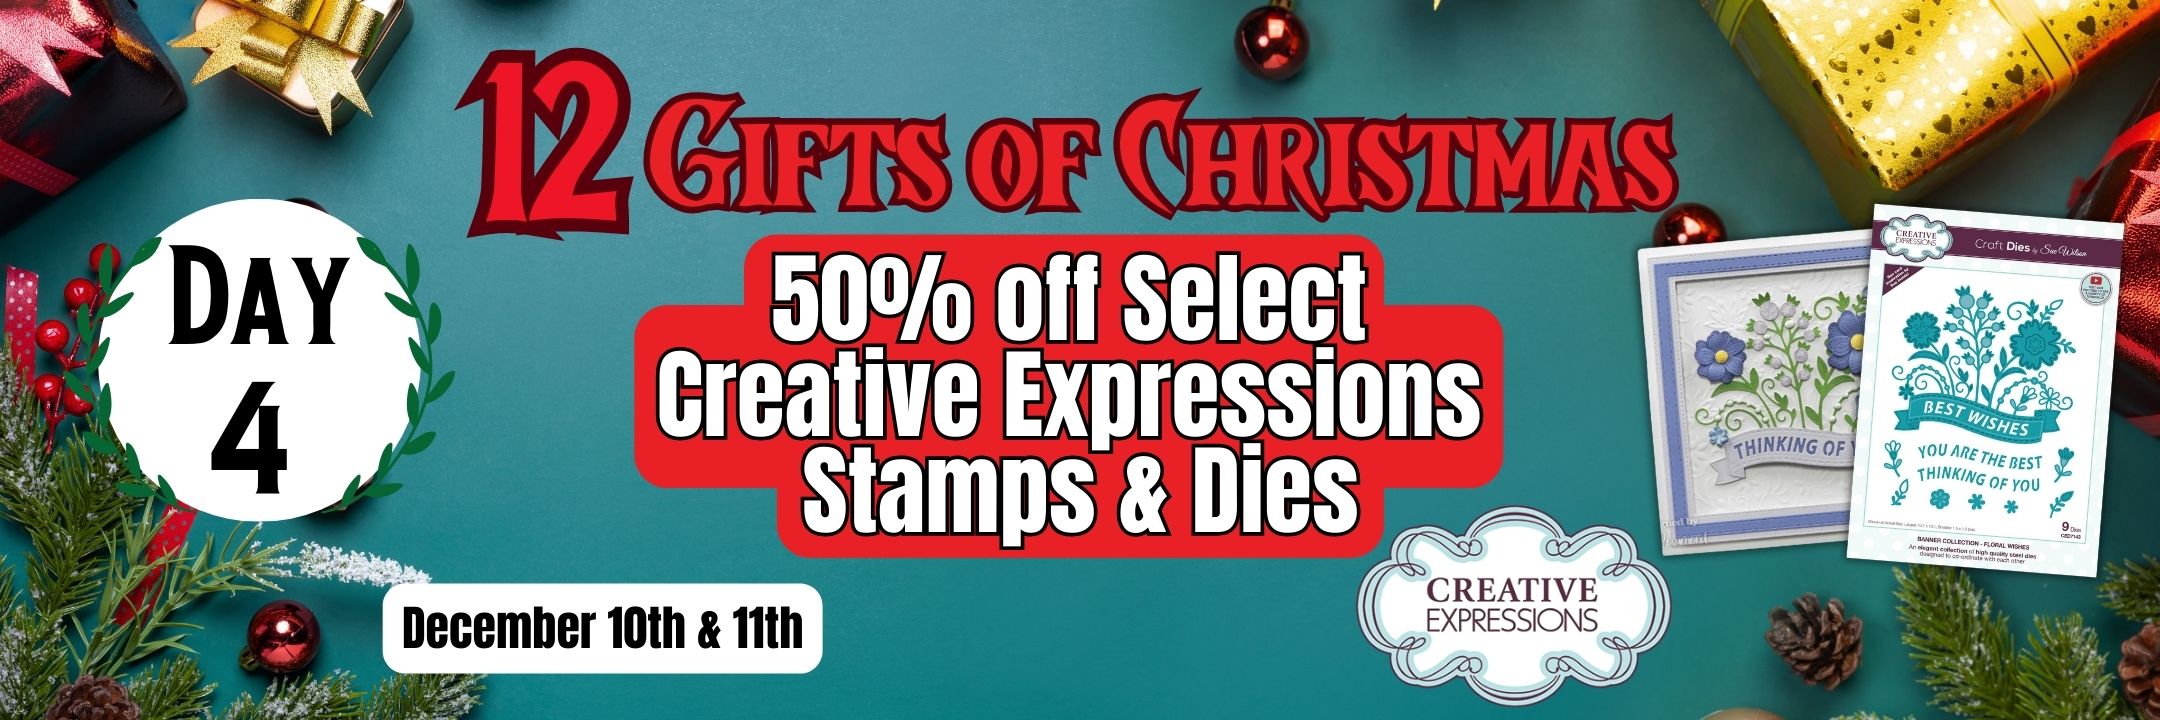 12 Gifts of Christmas -- Day 4 -- Creative Expressions Stamps and Dies